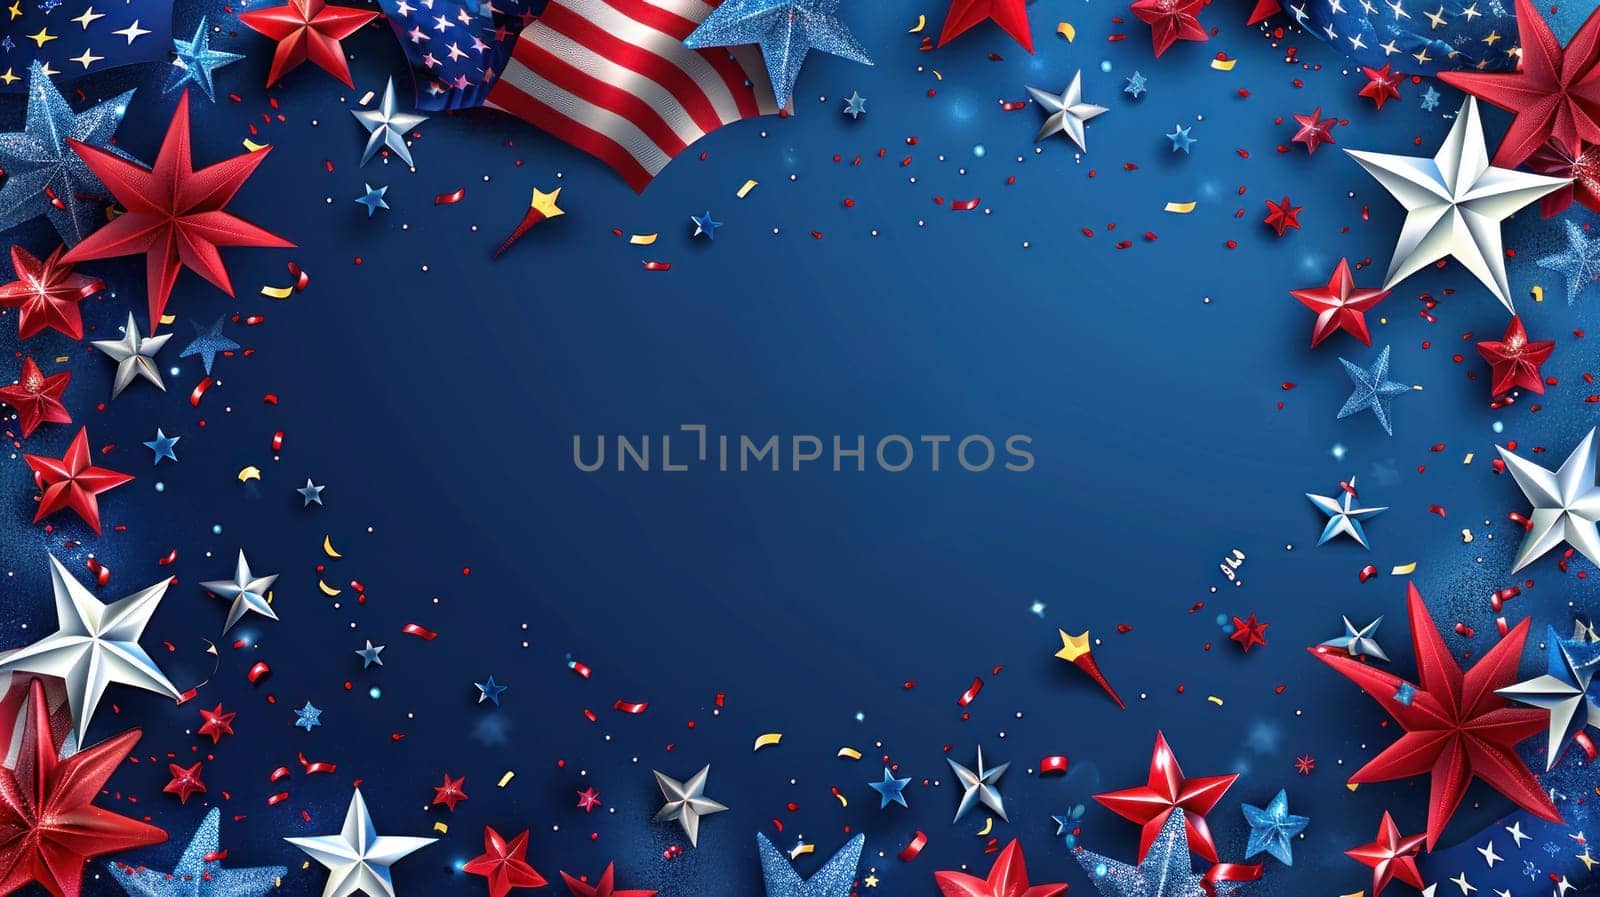 The 4th of July Independence Day is celebrated with a banner of stars and flags.